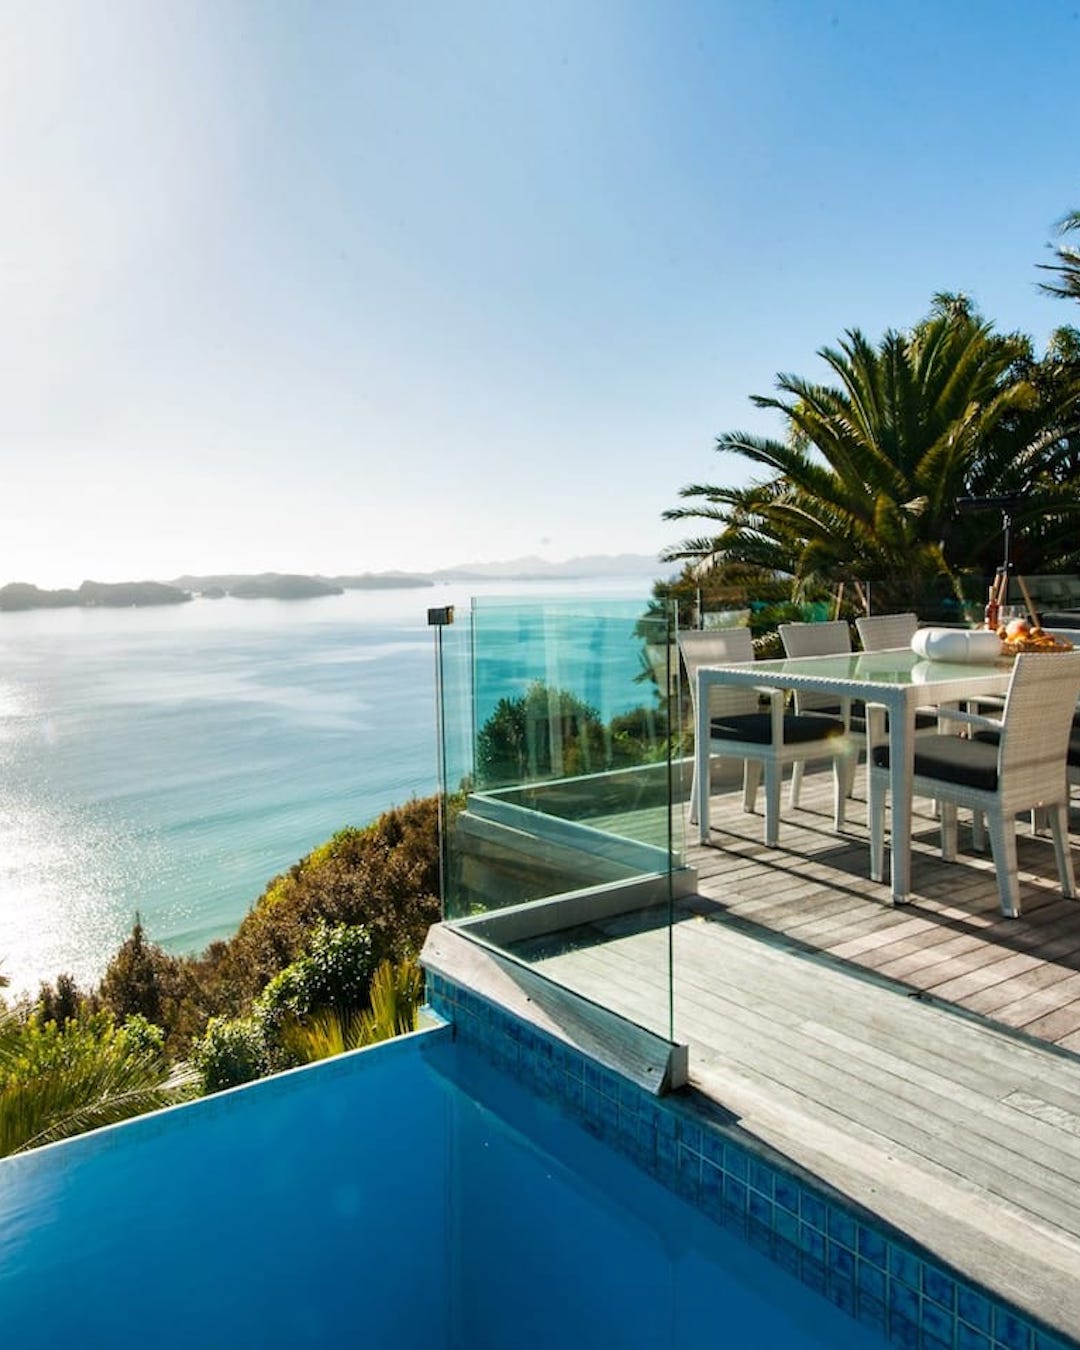 An incredible New Zealand Airbnb with a dip pool and deck overlooking a bay